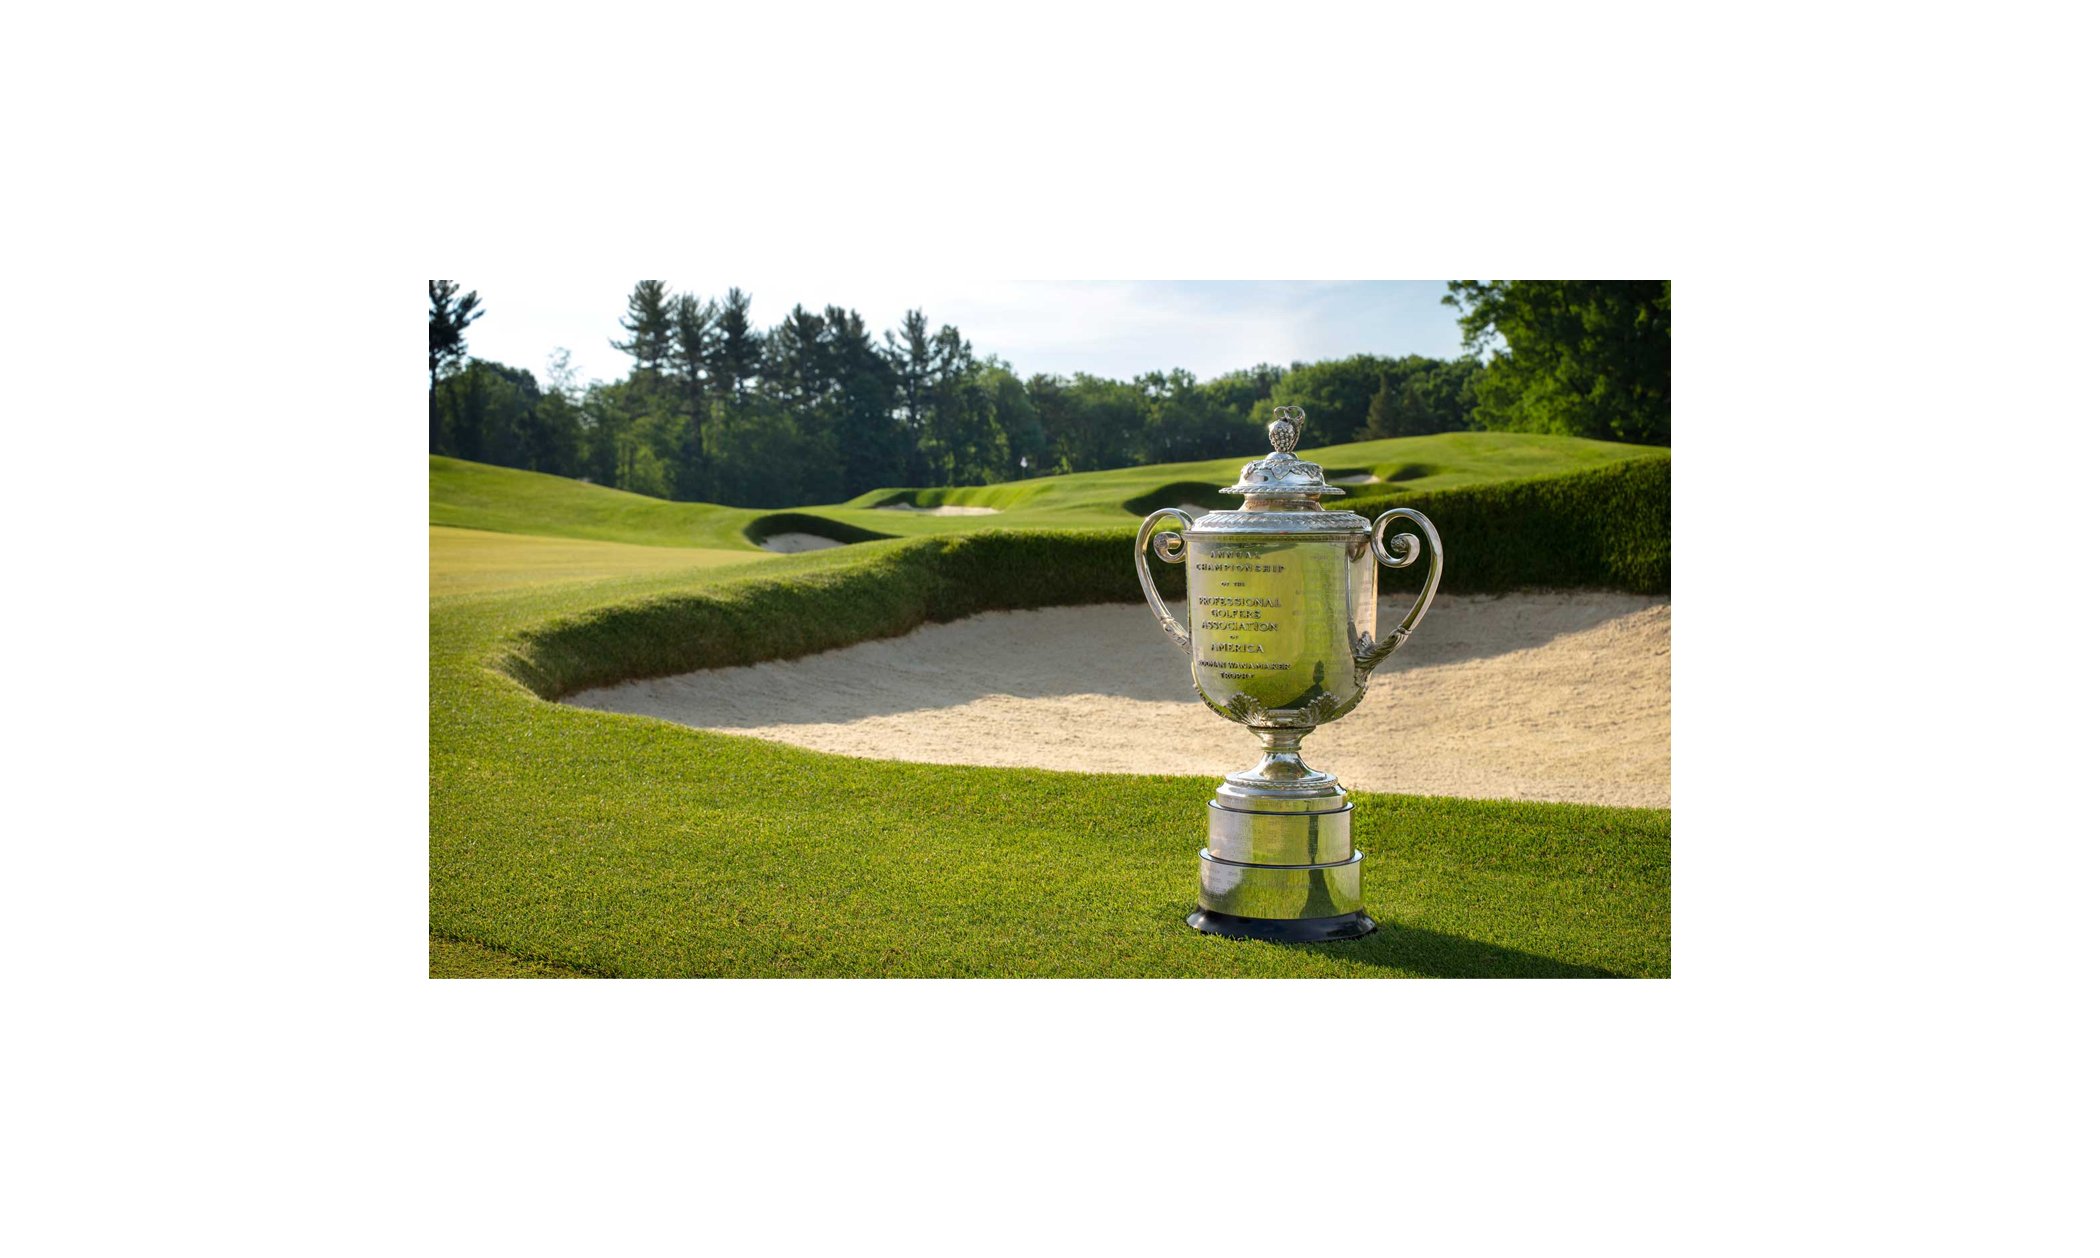 Enter for a Chance to Win a Trip for Two to the PGA Championship in Denver!